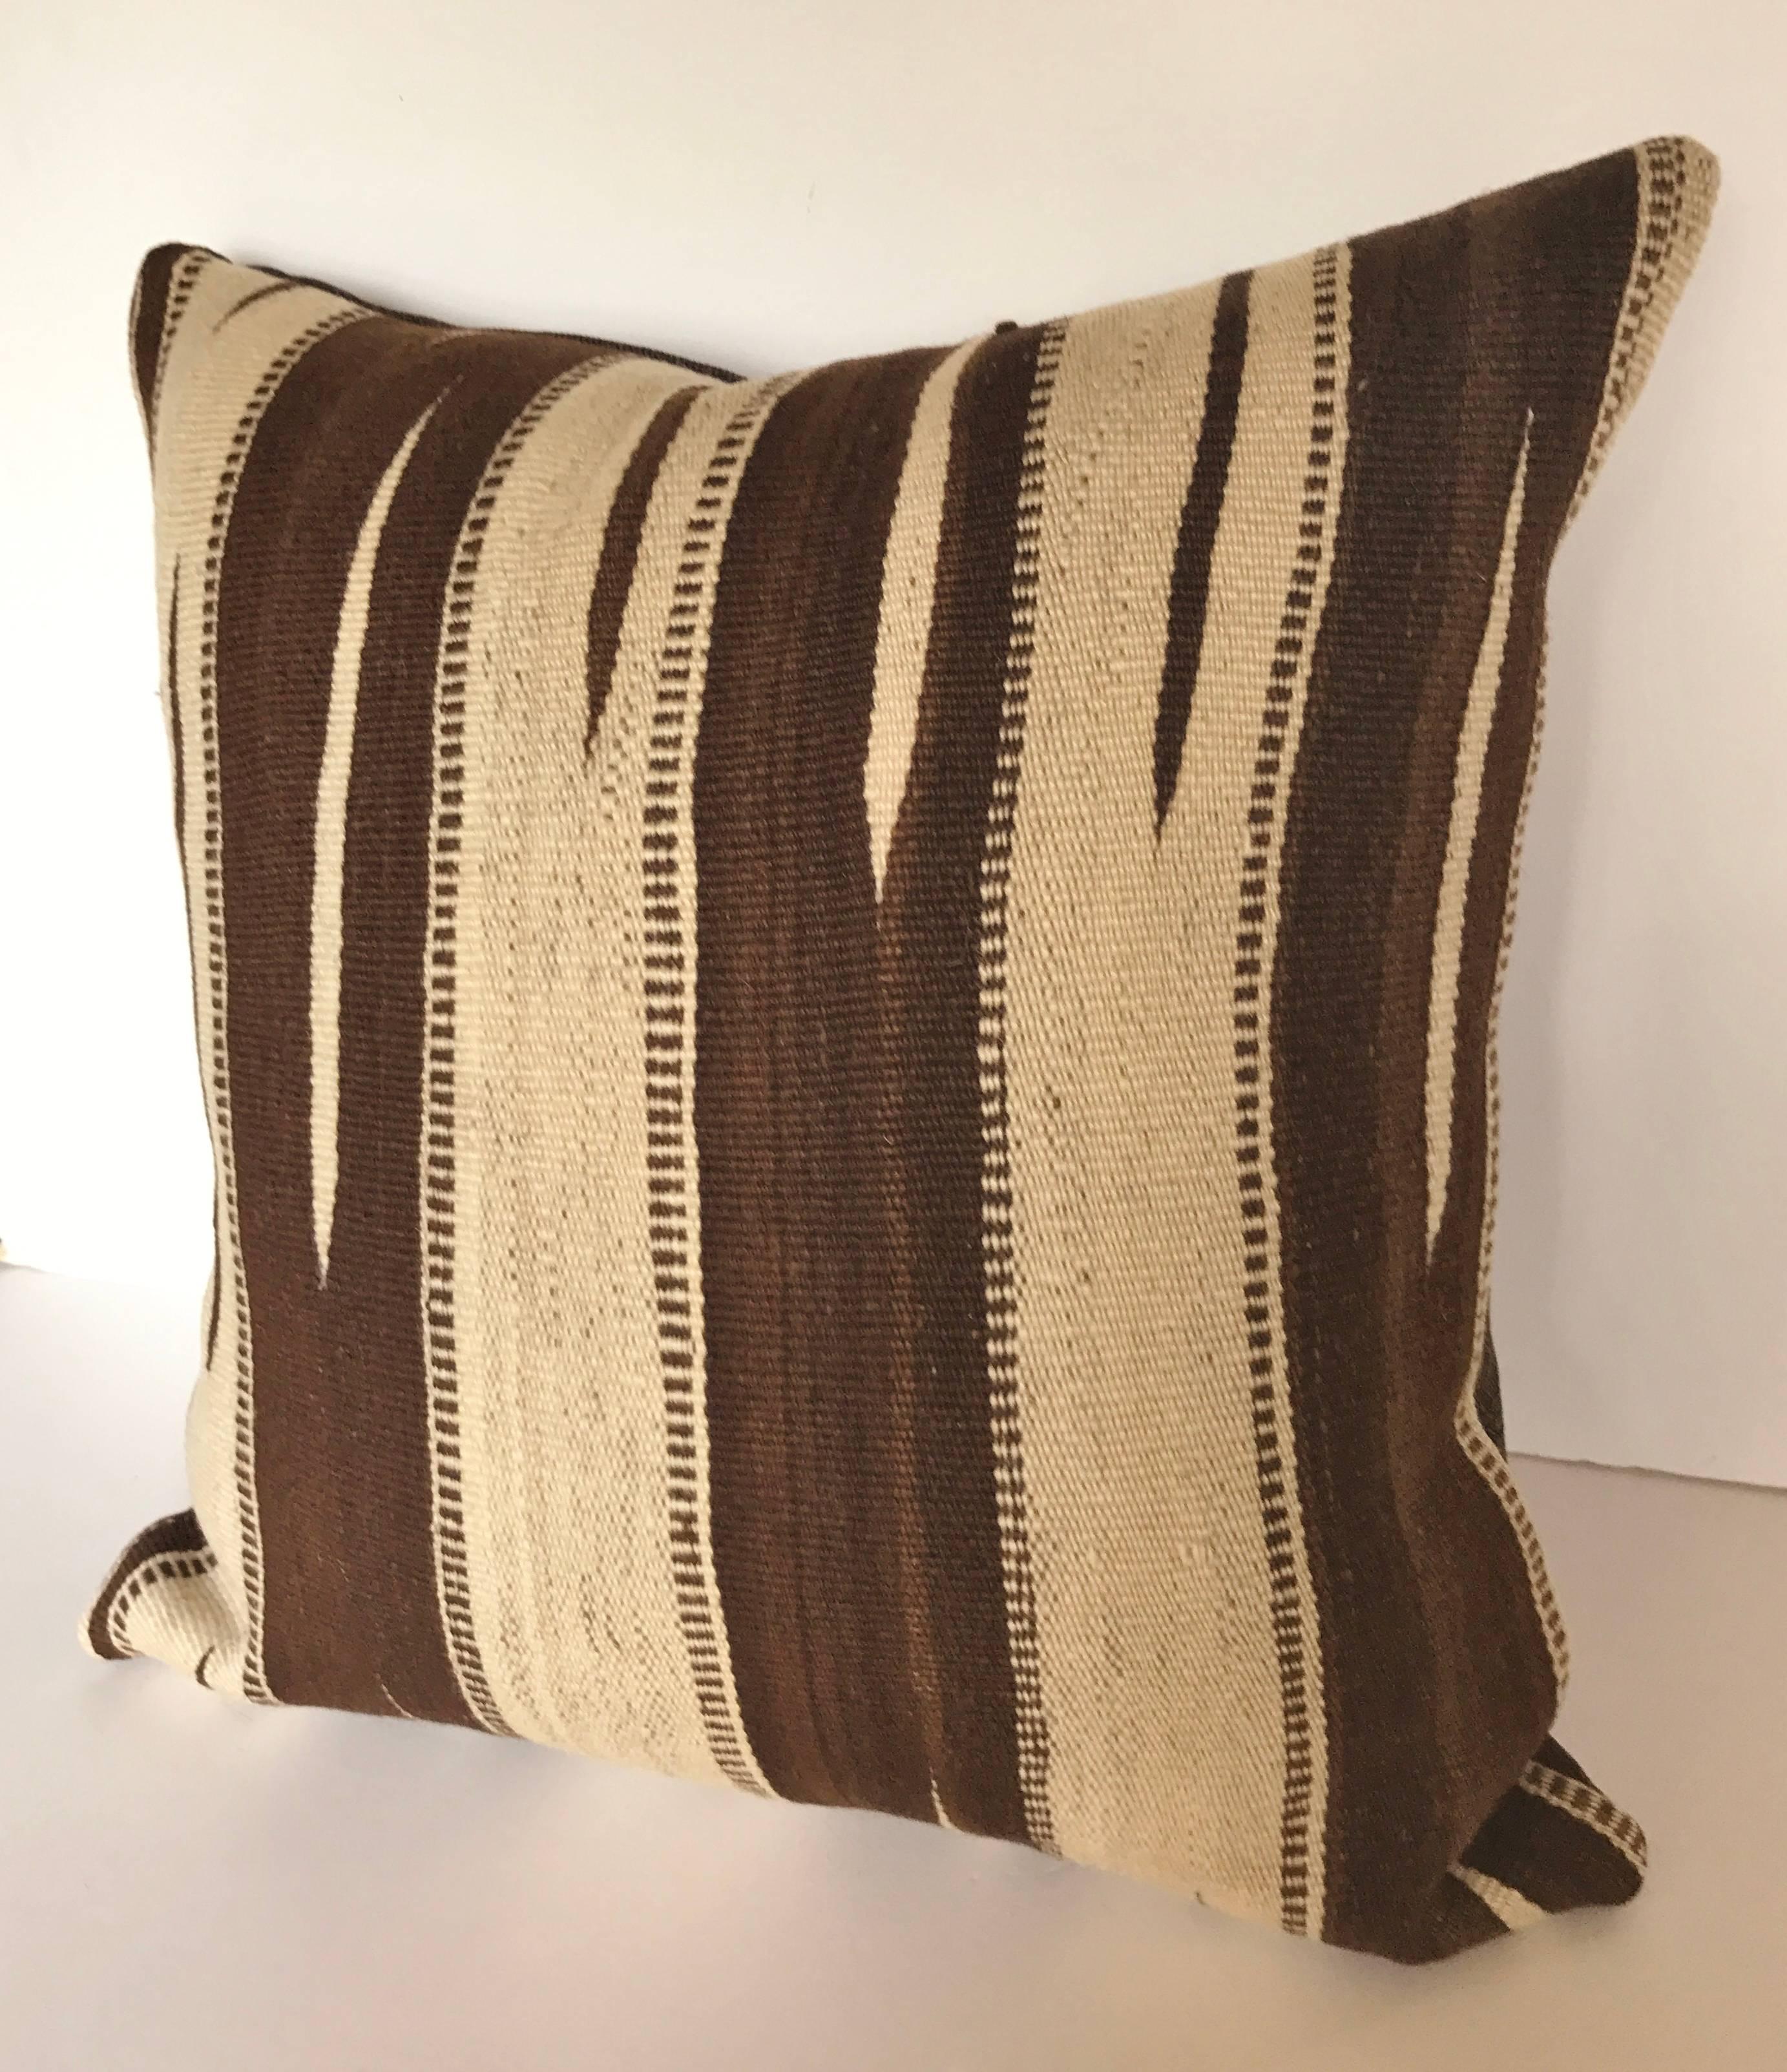 Custom pillow cut from a vintage hand loomed wool Moroccan Ourika Kilim from the Upper Atlas Mountains. Wool is soft and lustrous with natural colors and designs that were exclusively woven in the Ourika Valley. Pillow is backed in a linen blend,